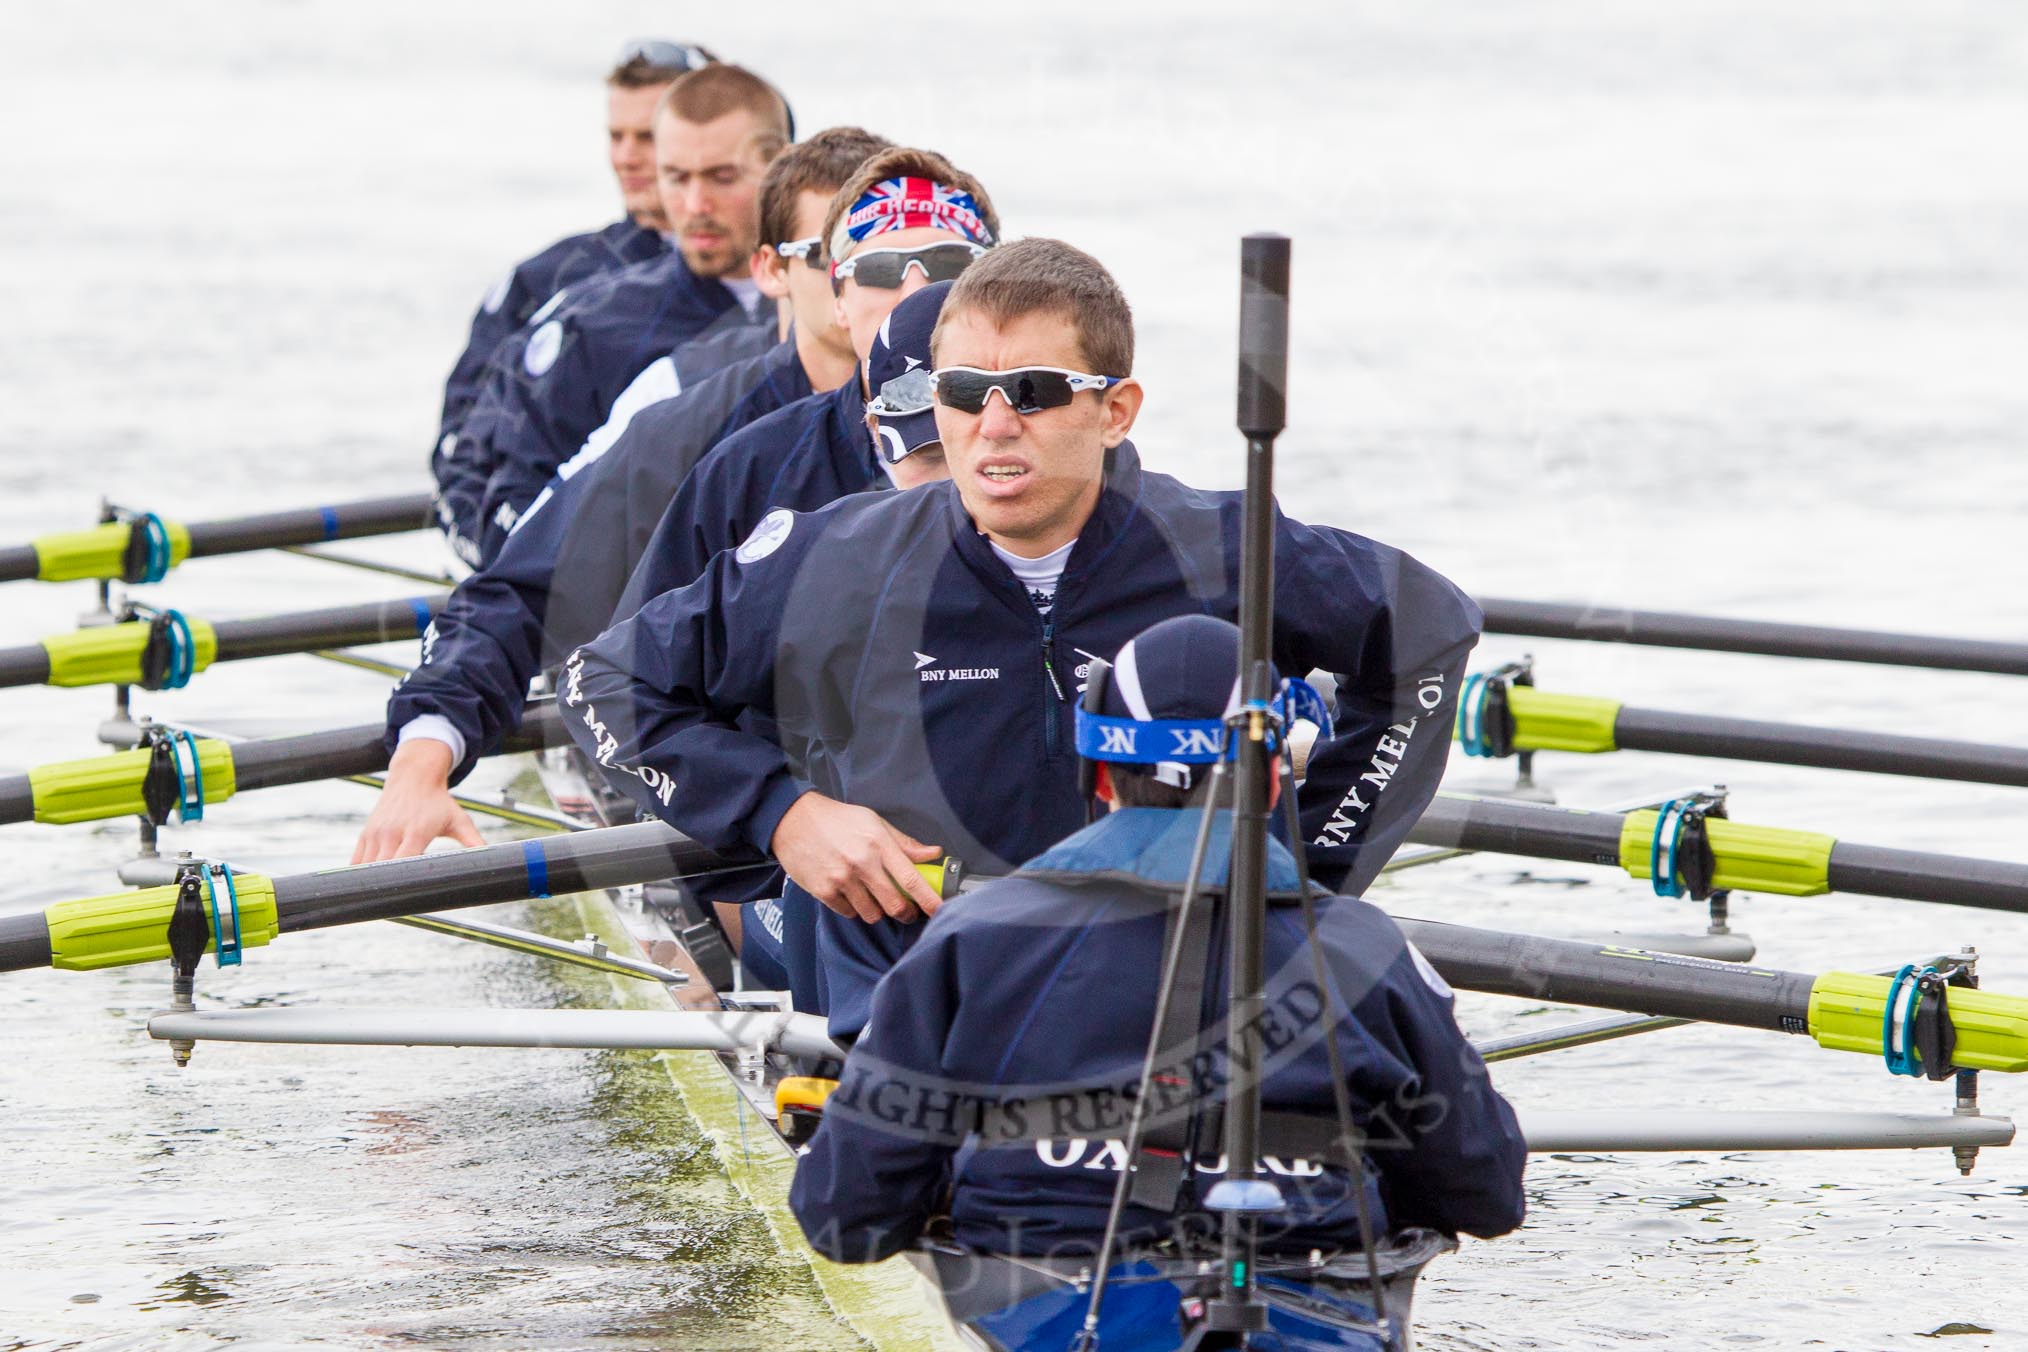 The Boat Race 2013.
Putney,
London SW15,

United Kingdom,
on 31 March 2013 at 15:48, image #171